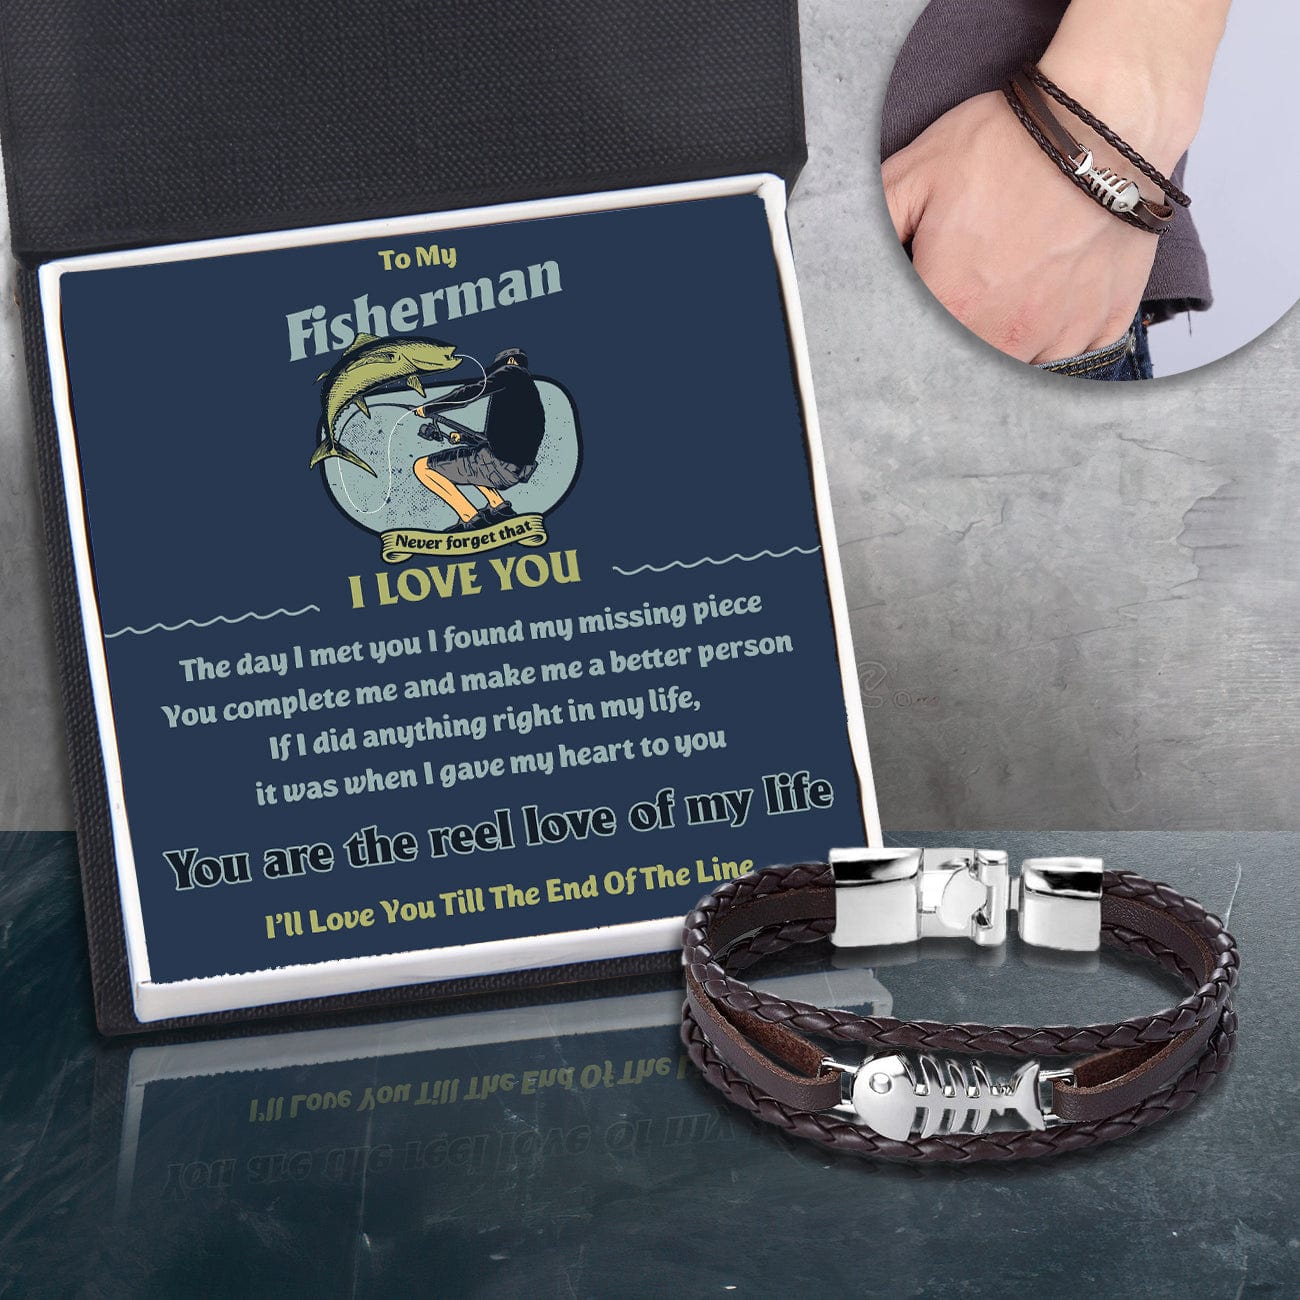 Fish Leather Bracelet - Fishing - To My Fisherman - I'll Love You Till The End Of The Line - Gbzp26005